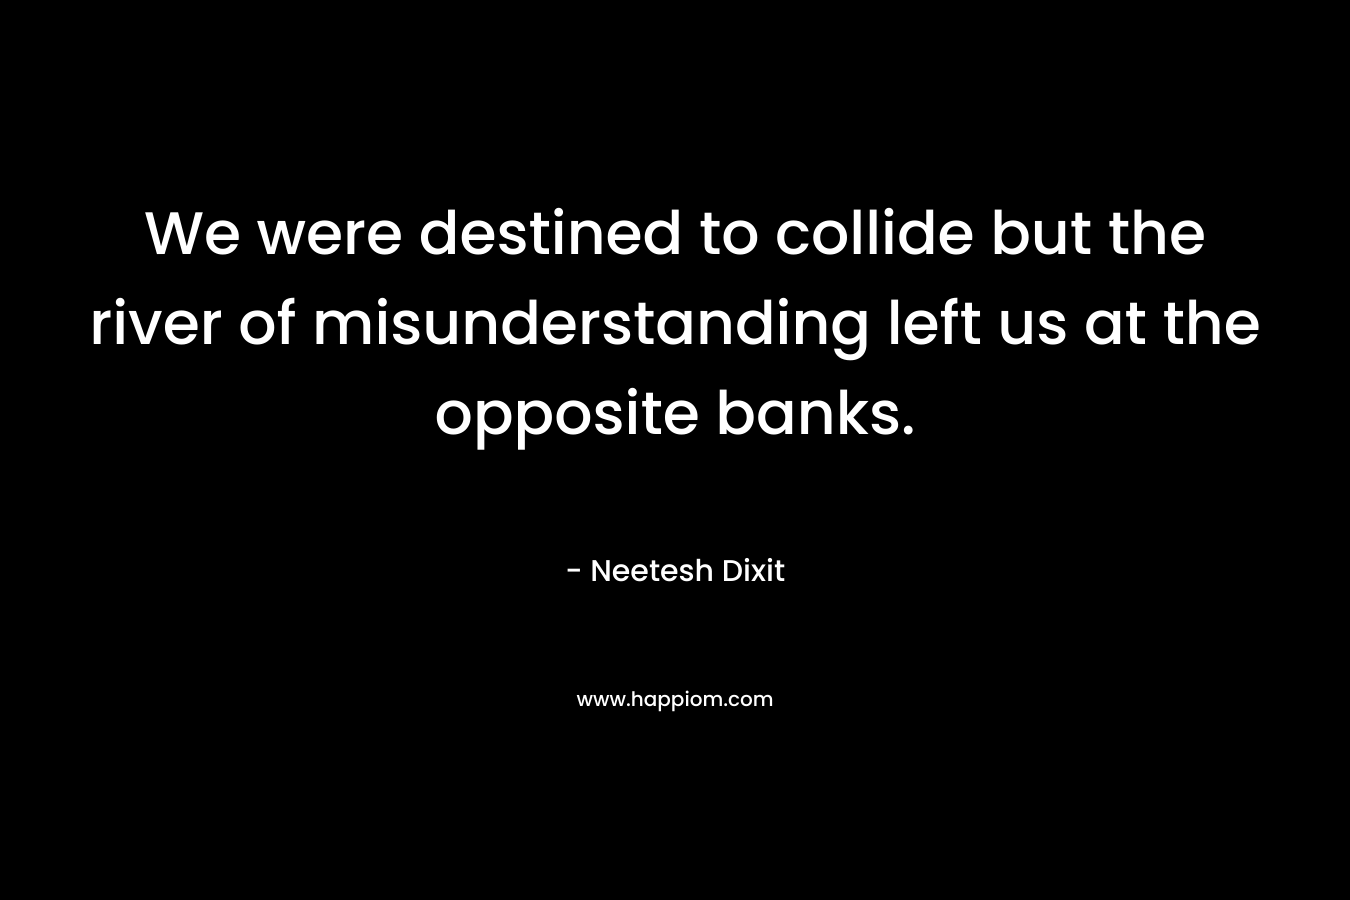 We were destined to collide but the river of misunderstanding left us at the opposite banks. – Neetesh Dixit